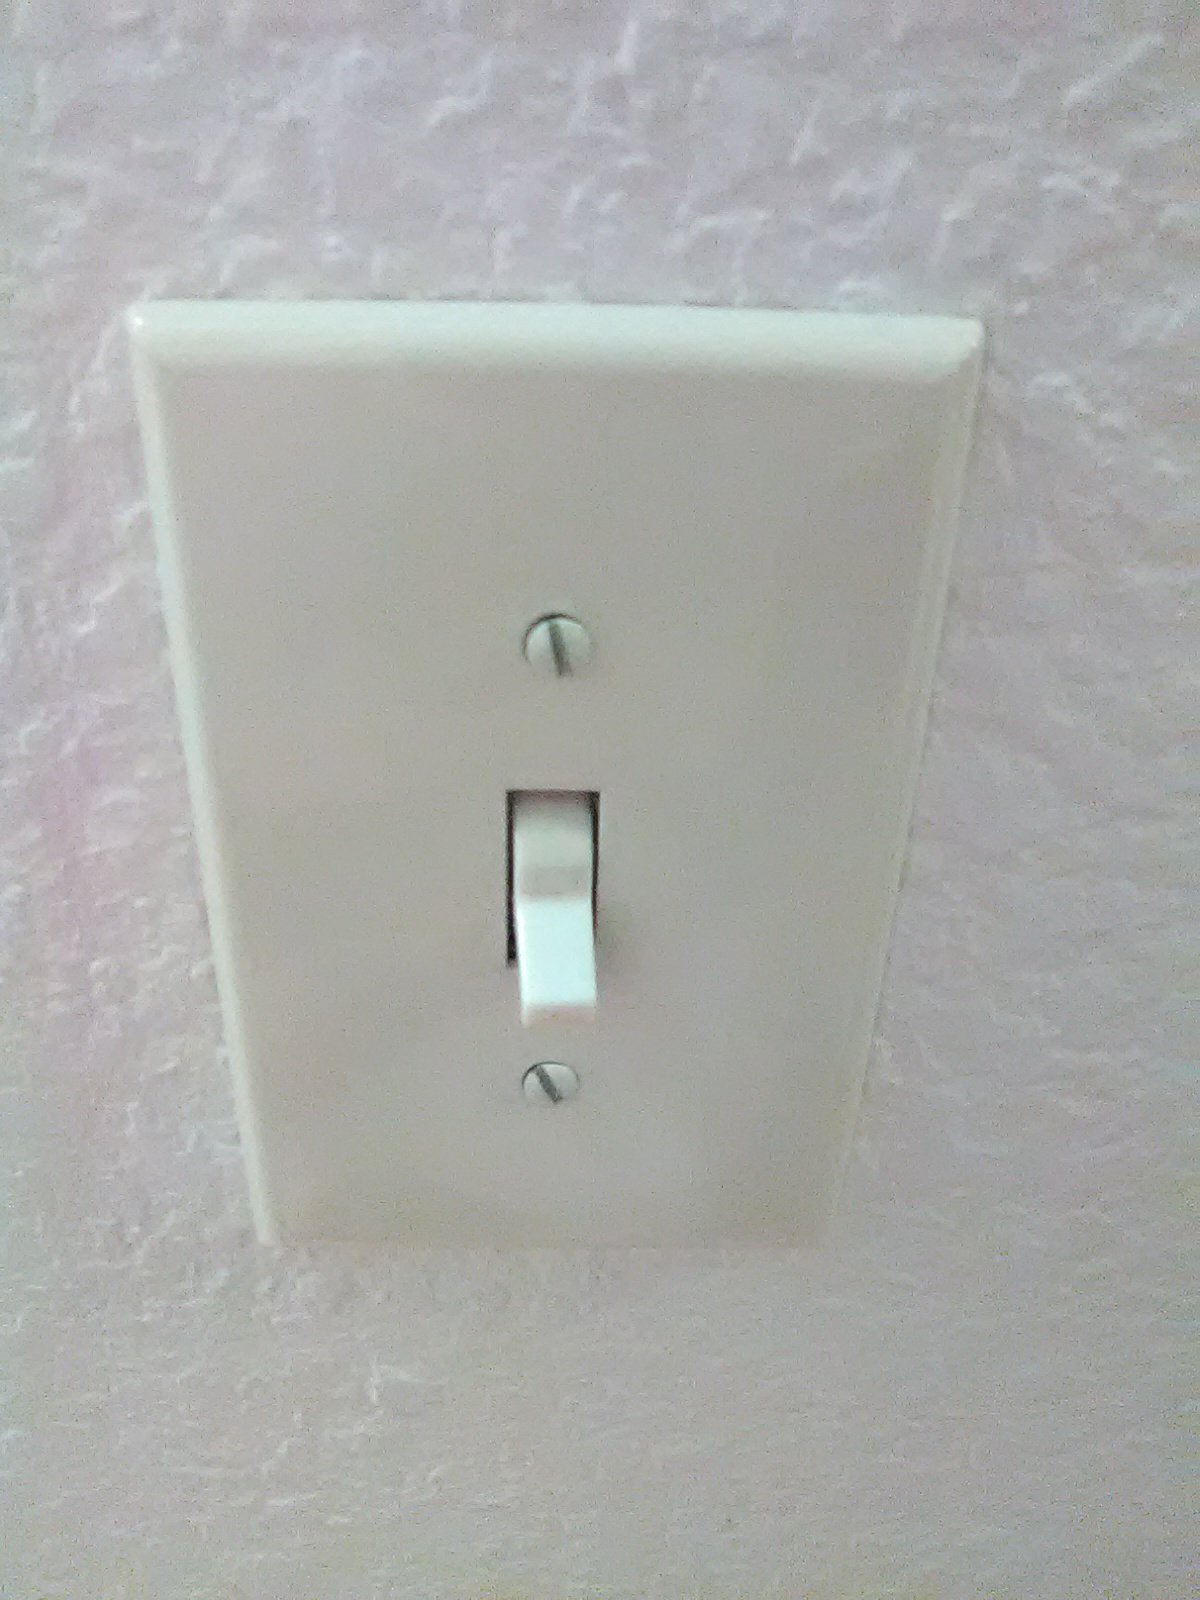 Outlet with improper fasteners.